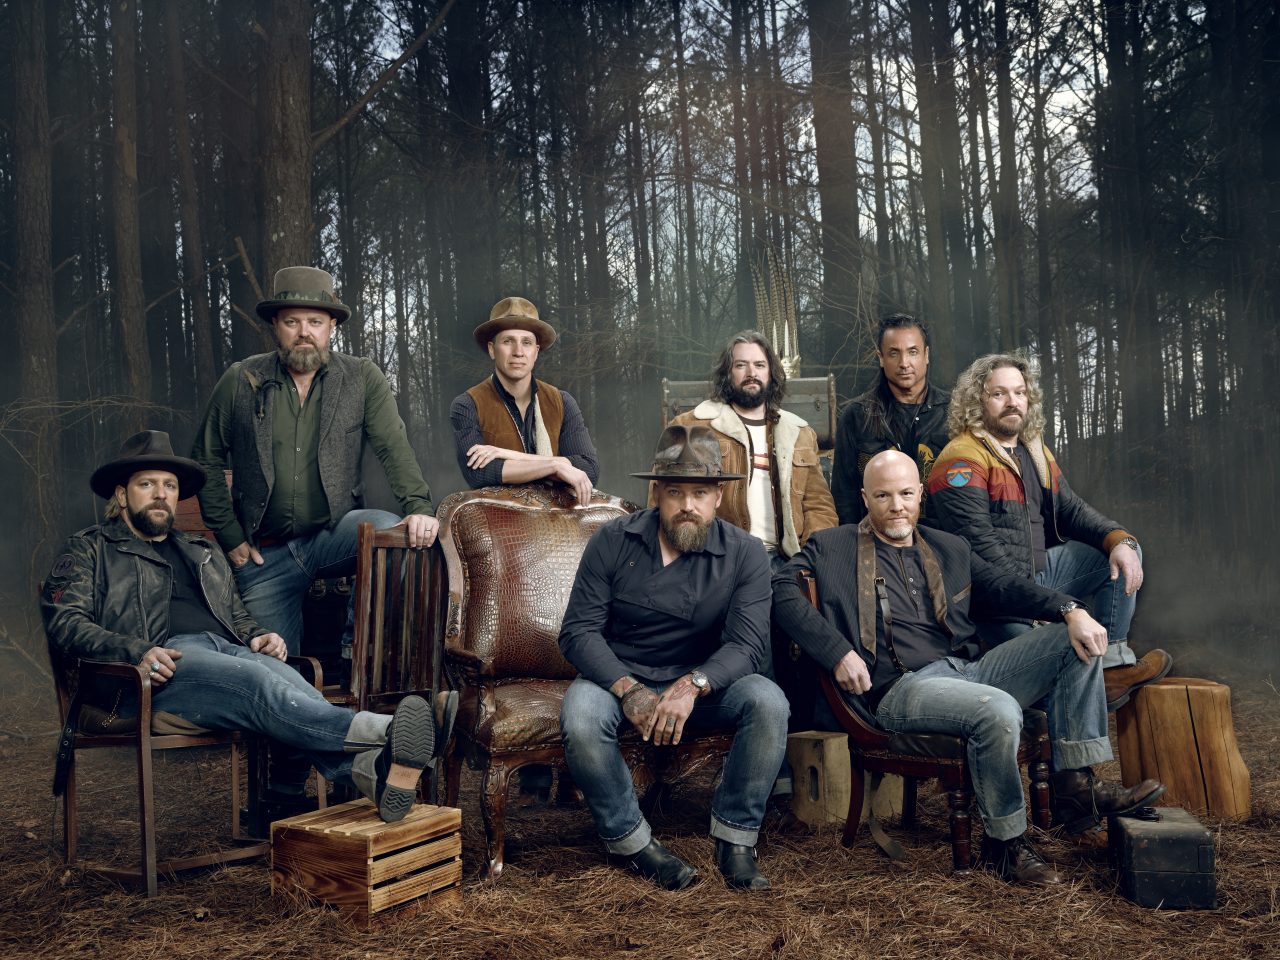 Zac Brown Band’s Latest Single Hits Home For the Group